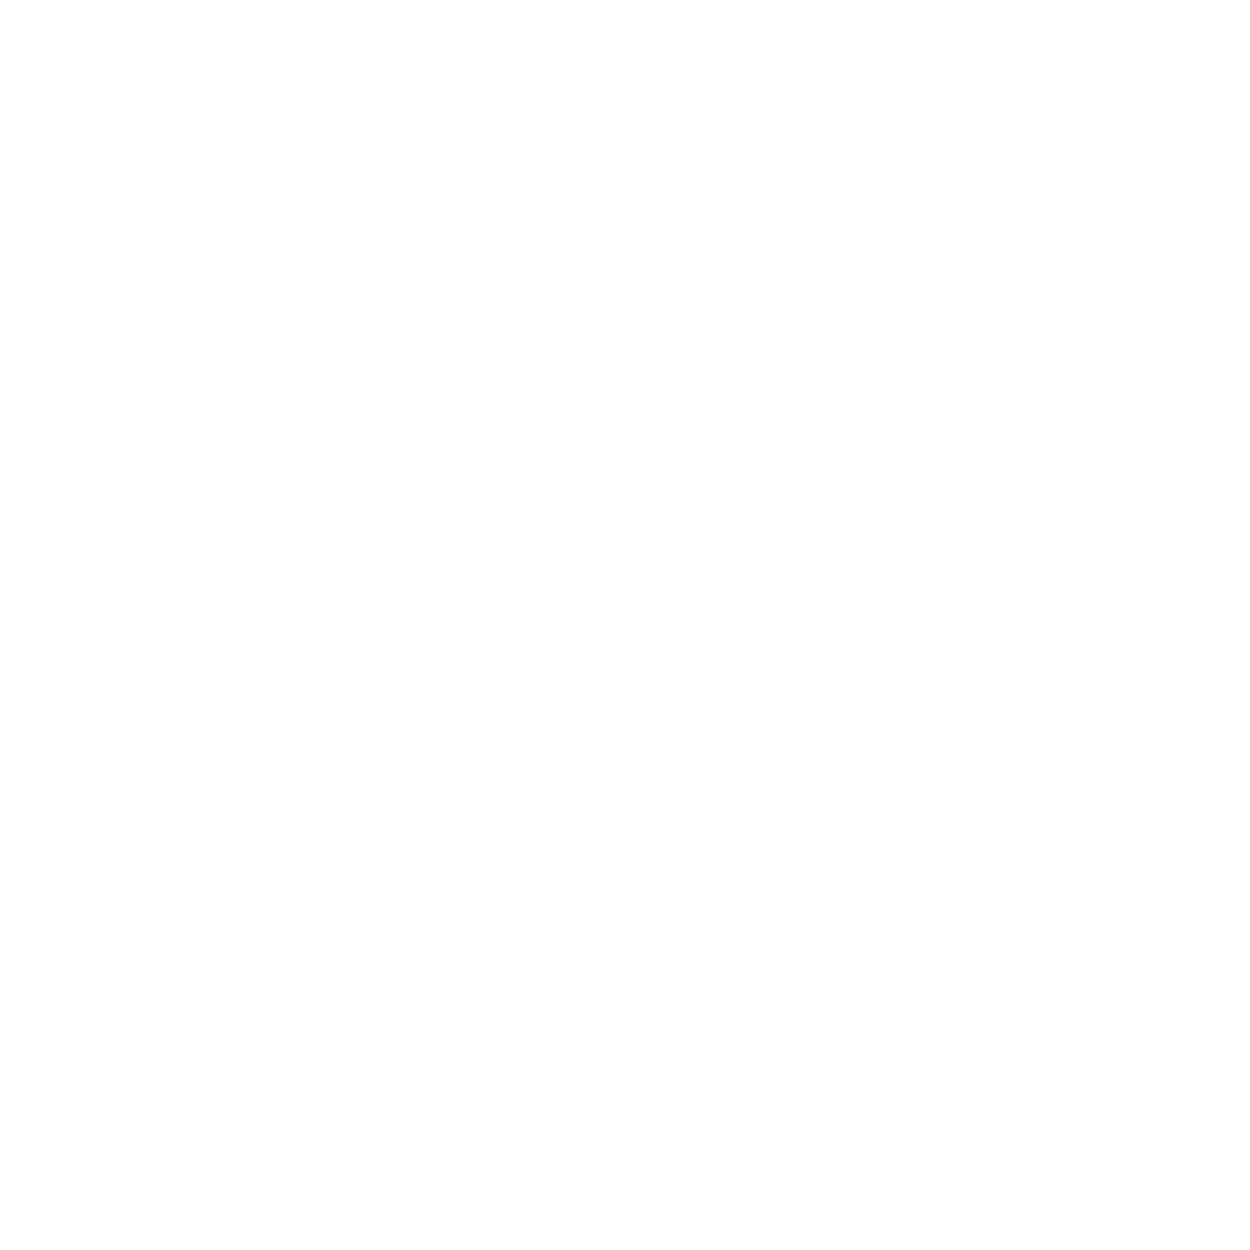 <span style="color: white; ">AIRPORTS</span>